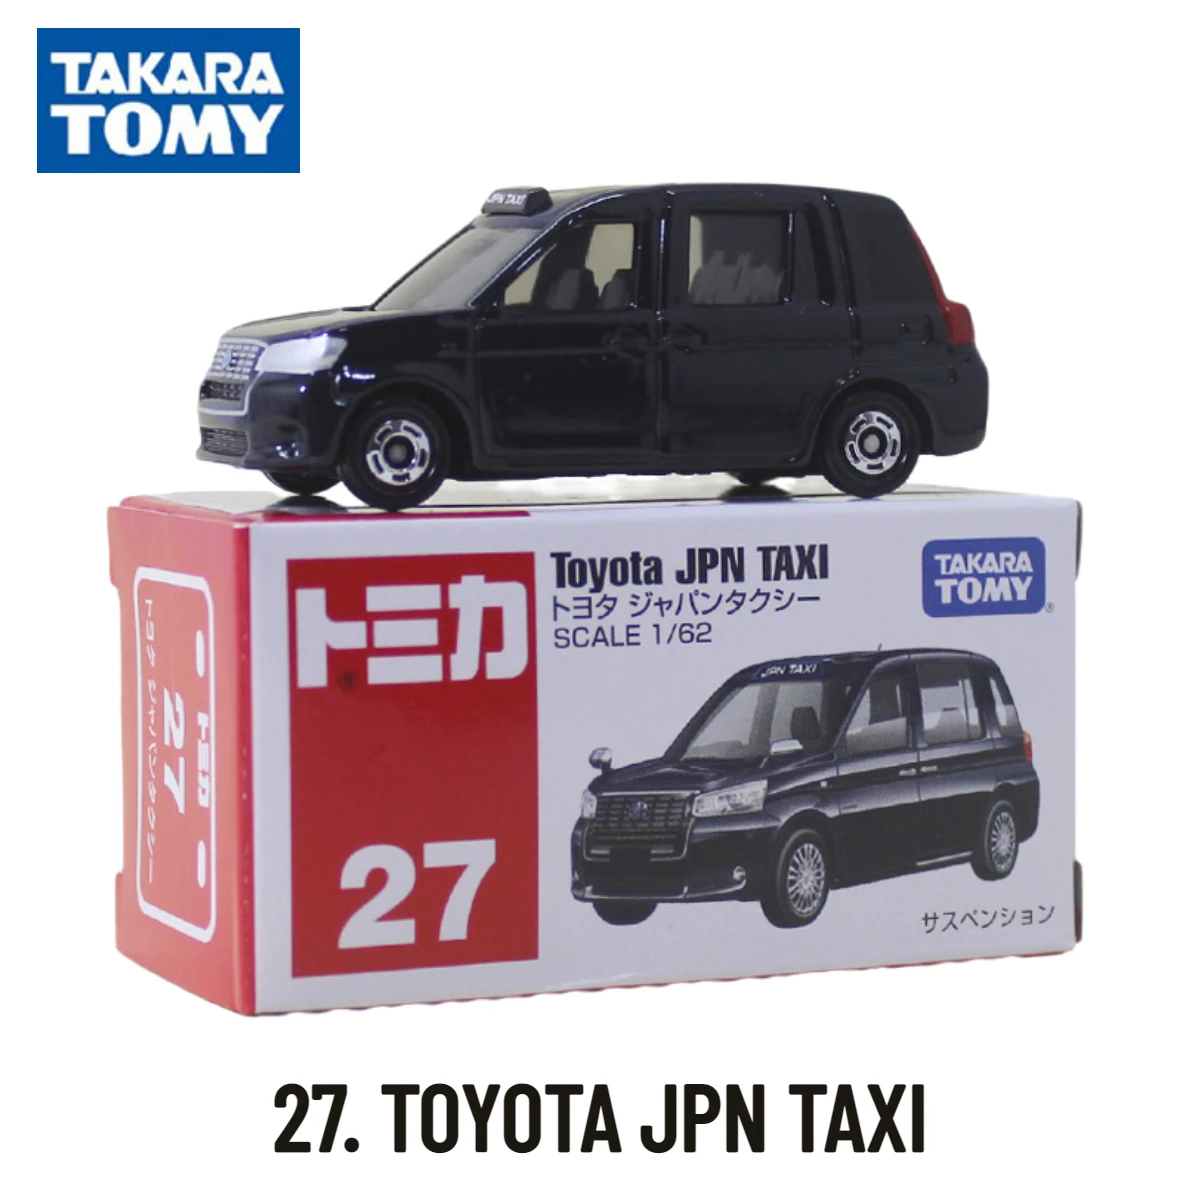 Takara Tomy Tomica Classic 1-30, TOYOTA JPN TAXI Scale Car Model Replica Collection, Kids Xmas Gift Toys for Boys takara tomy tomica premium tp scale car model toyota honda nissan perfect kids room decor xmas gift toys for baby boys